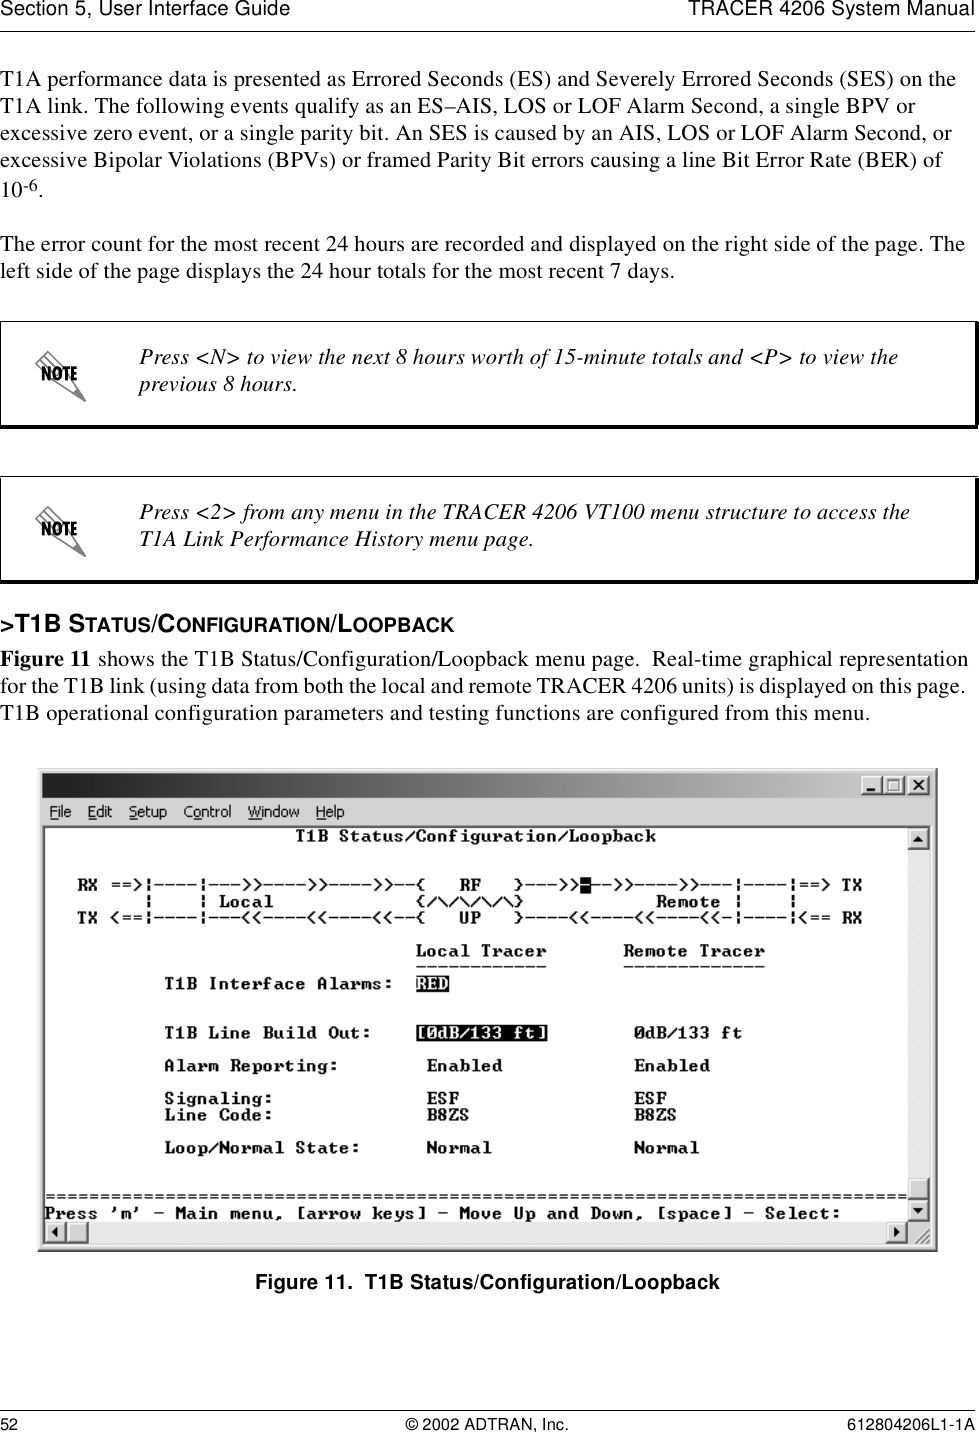 Section 5, User Interface Guide TRACER 4206 System Manual52 © 2002 ADTRAN, Inc. 612804206L1-1AT1A performance data is presented as Errored Seconds (ES) and Severely Errored Seconds (SES) on the T1A link. The following events qualify as an ES–AIS, LOS or LOF Alarm Second, a single BPV or excessive zero event, or a single parity bit. An SES is caused by an AIS, LOS or LOF Alarm Second, or excessive Bipolar Violations (BPVs) or framed Parity Bit errors causing a line Bit Error Rate (BER) of 10-6.The error count for the most recent 24 hours are recorded and displayed on the right side of the page. The left side of the page displays the 24 hour totals for the most recent 7 days.&gt;T1B STATUS/CONFIGURATION/LOOPBACKFigure 11 shows the T1B Status/Configuration/Loopback menu page.  Real-time graphical representation for the T1B link (using data from both the local and remote TRACER 4206 units) is displayed on this page.  T1B operational configuration parameters and testing functions are configured from this menu.Figure 11.  T1B Status/Configuration/LoopbackPress &lt;N&gt; to view the next 8 hours worth of 15-minute totals and &lt;P&gt; to view the previous 8 hours.Press &lt;2&gt; from any menu in the TRACER 4206 VT100 menu structure to access the T1A Link Performance History menu page.